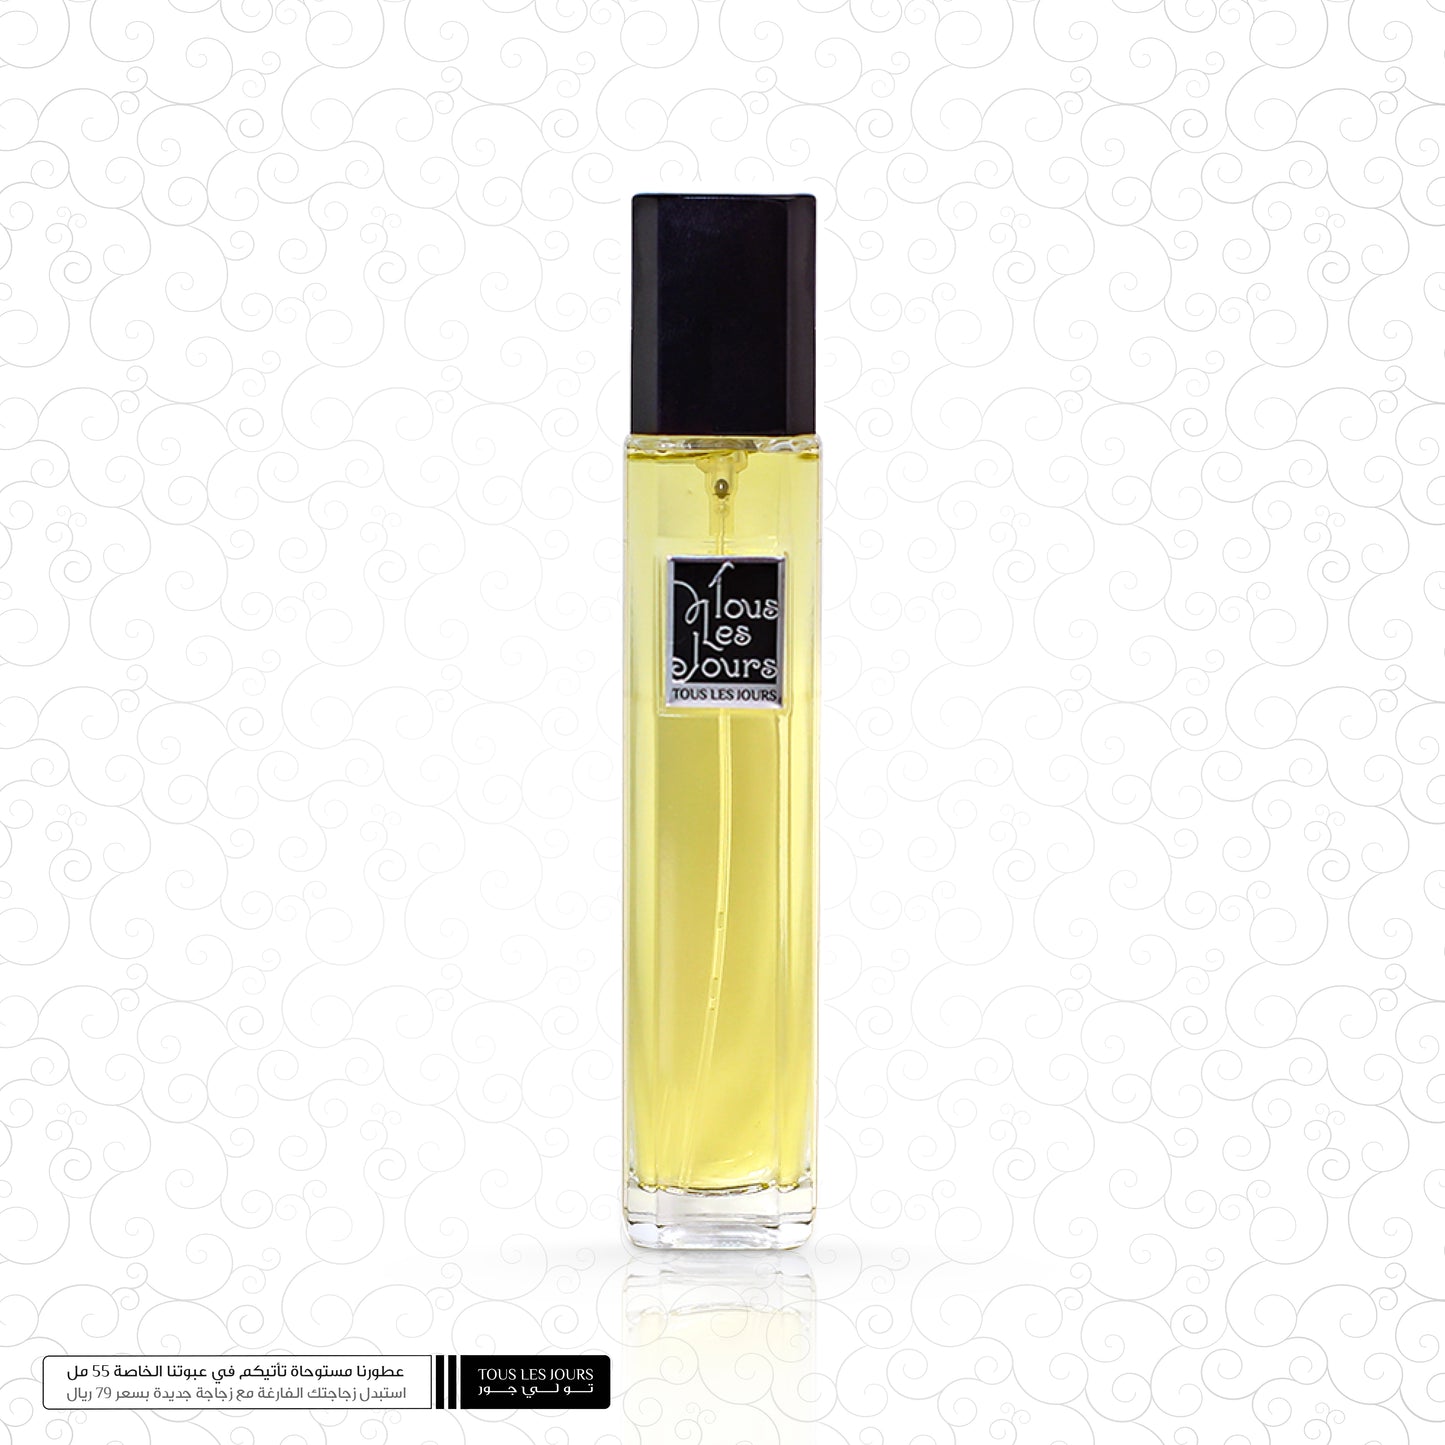 Perfume Day 332-Tous les jours Sheikh Gold Edition